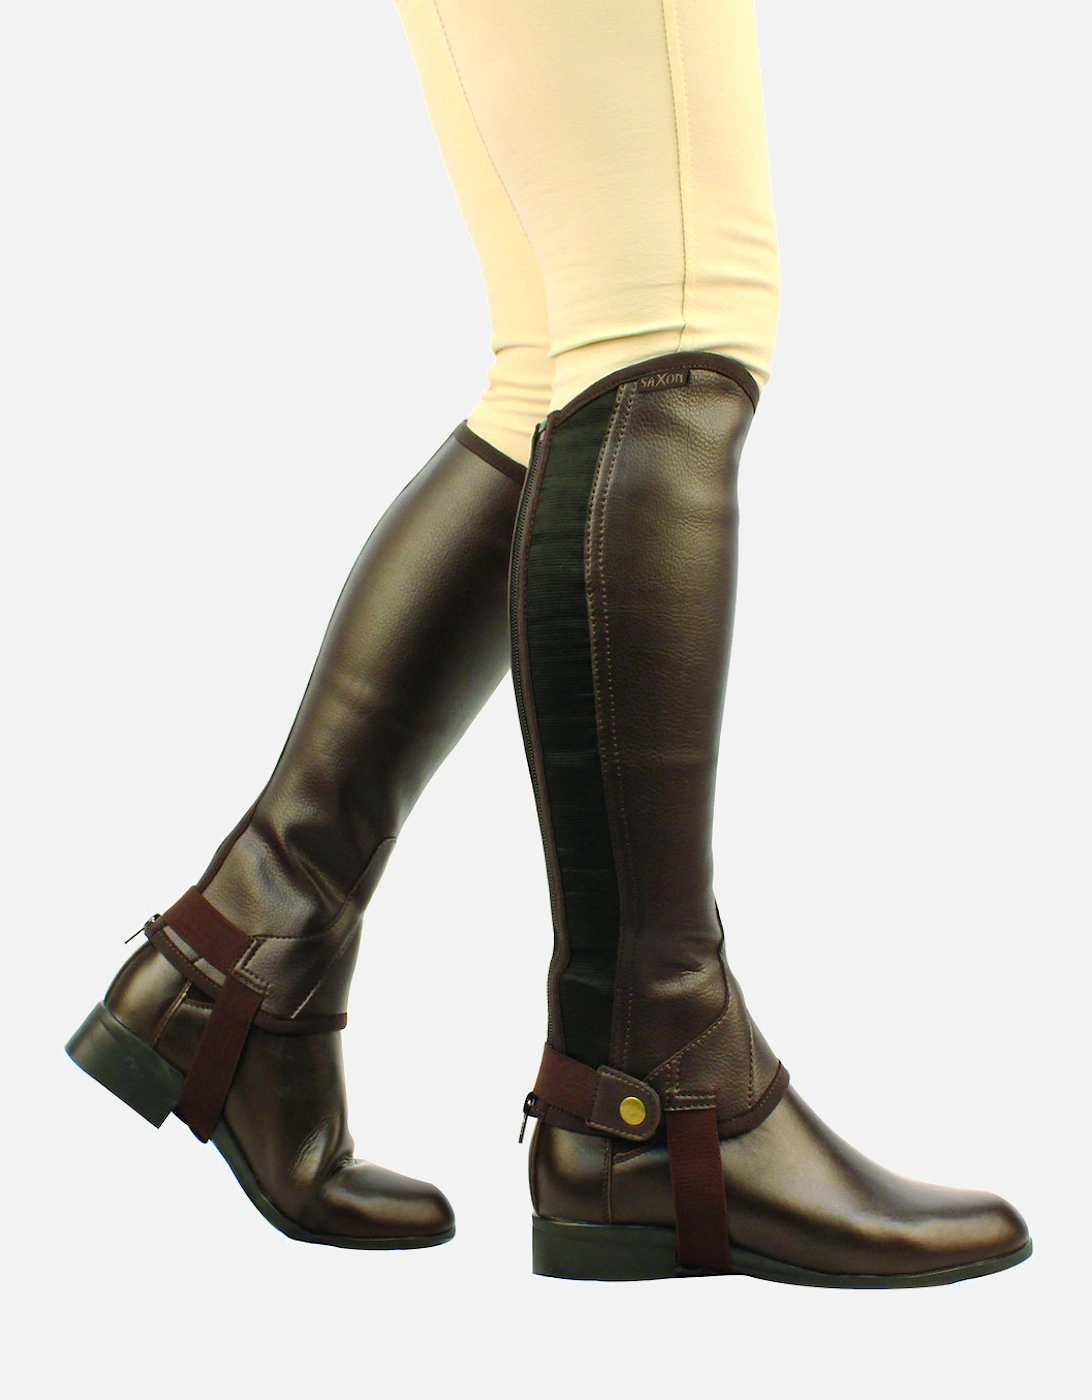 Childrens/Kids Equileather Half Chaps